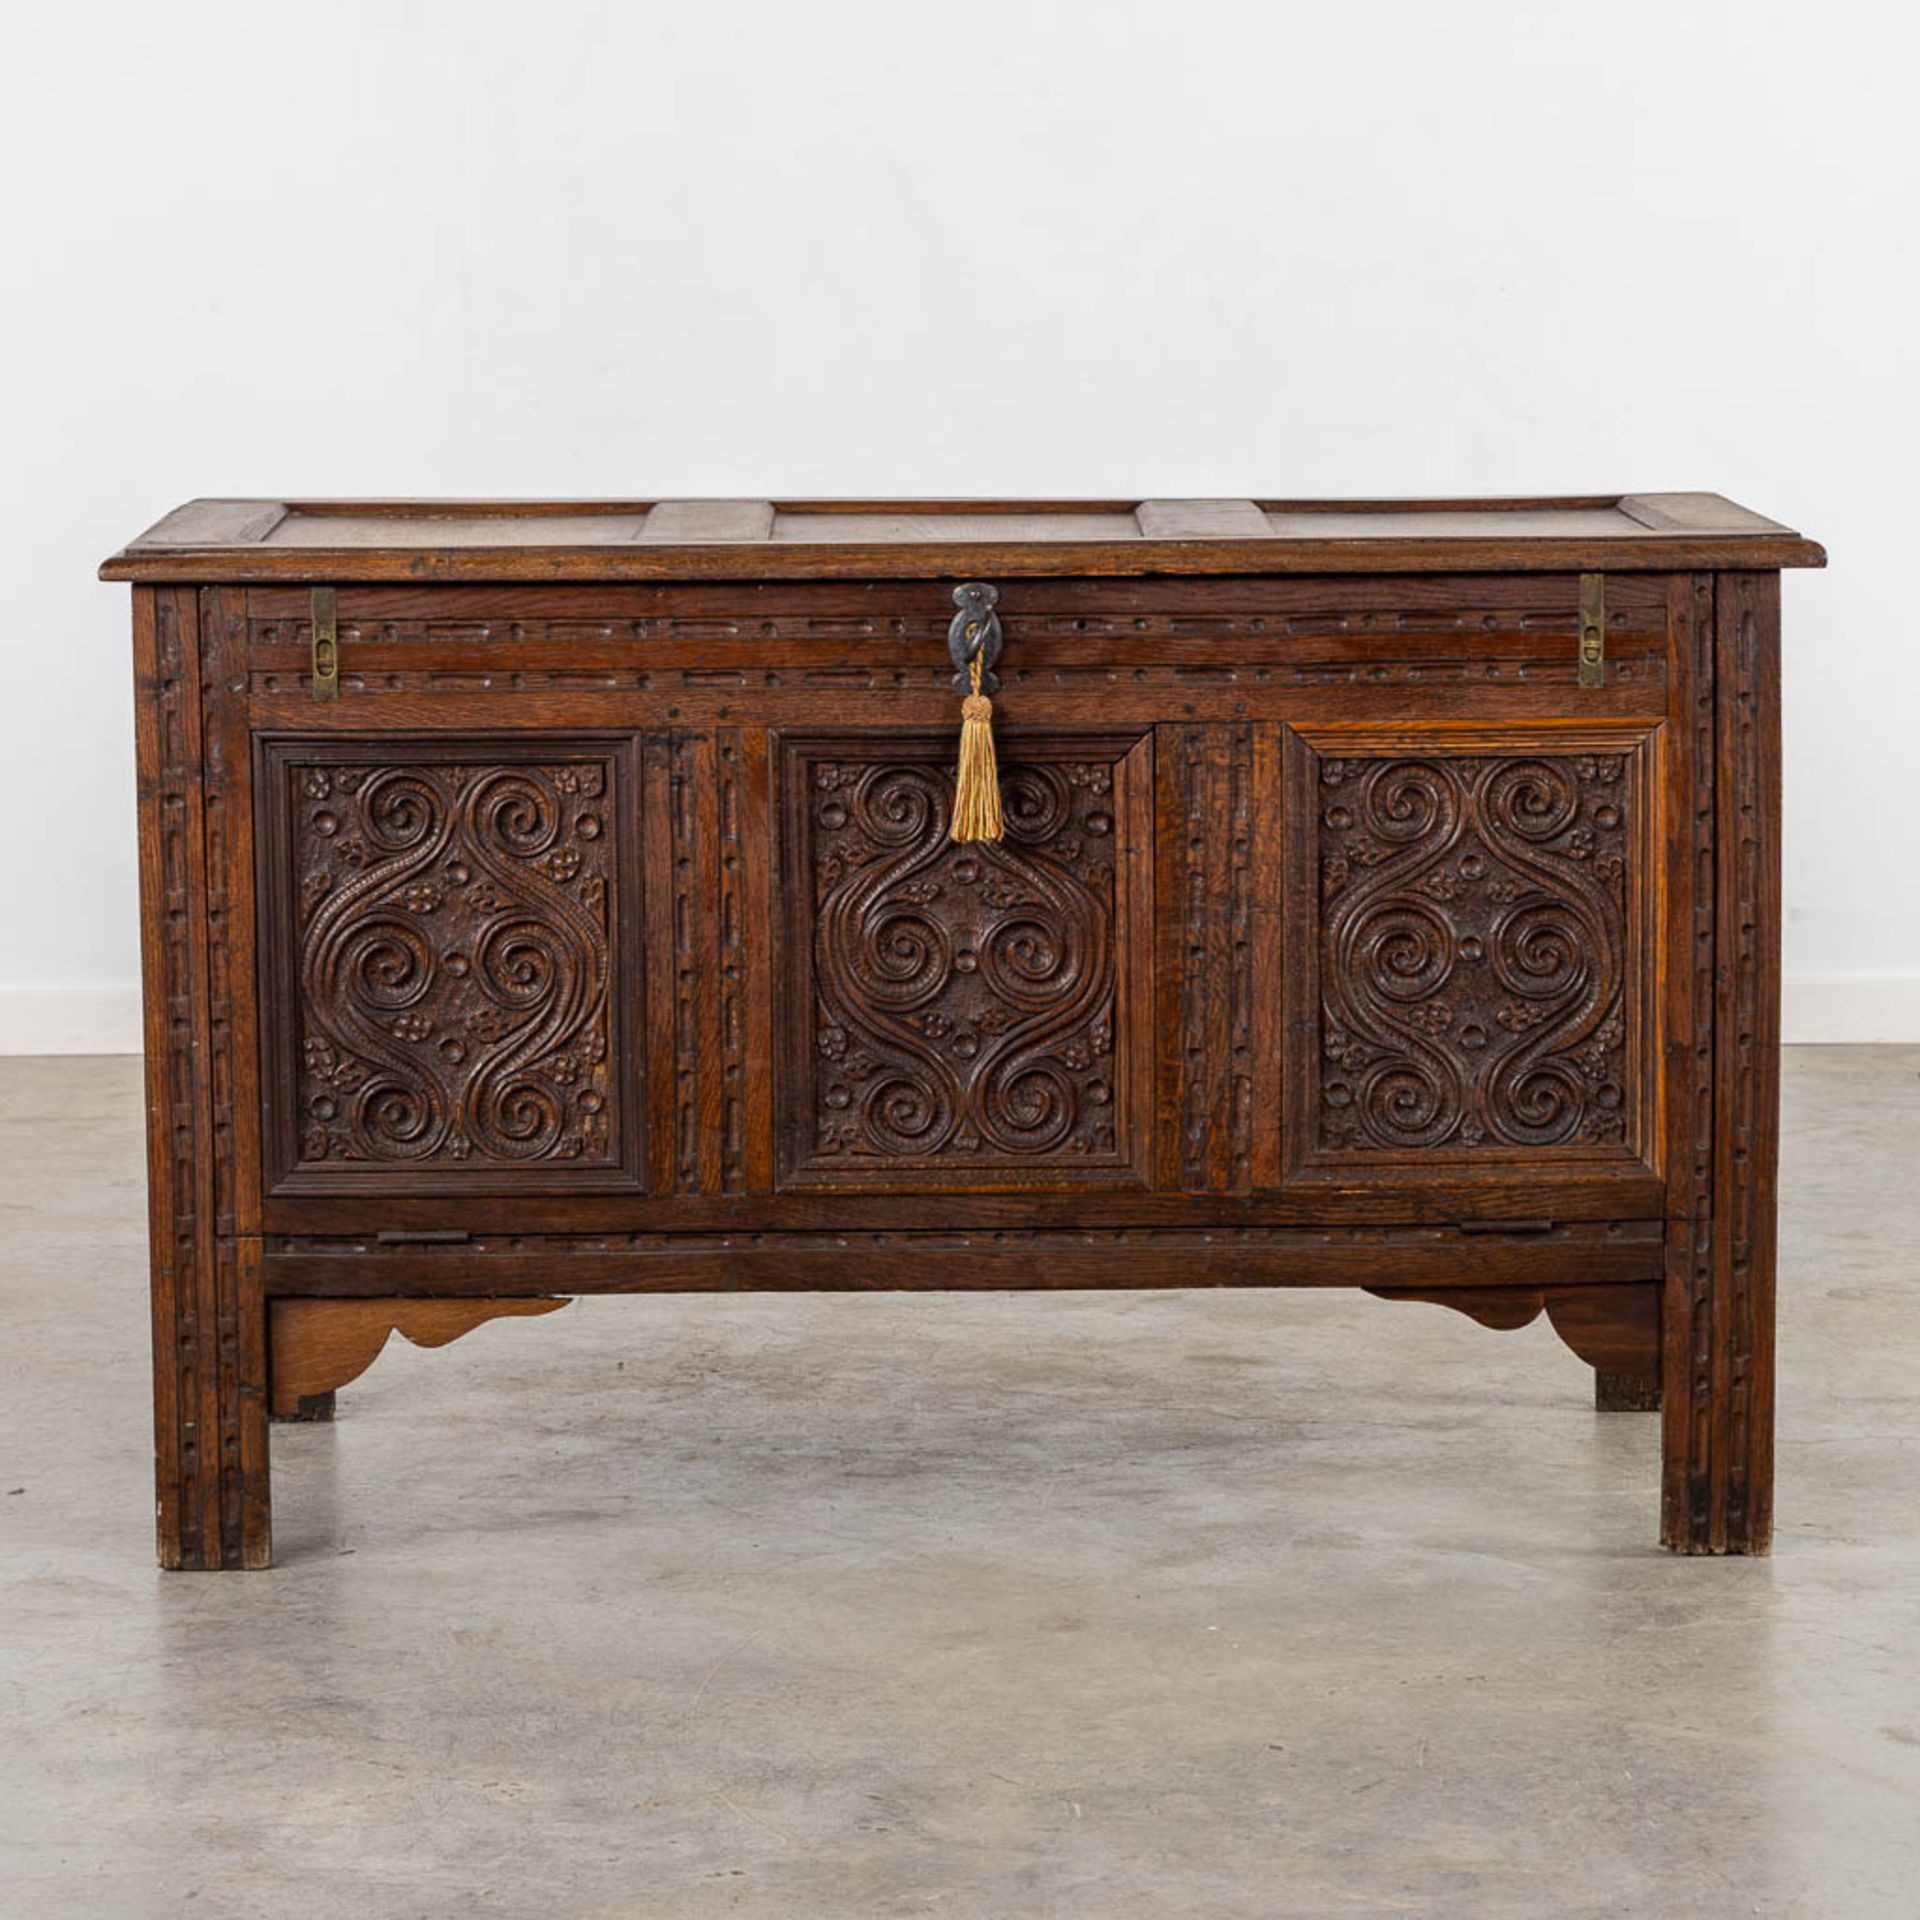 A chest with wood-sculptured panels. 19th C. (L:56 x W:120 x H:72 cm) - Image 5 of 11